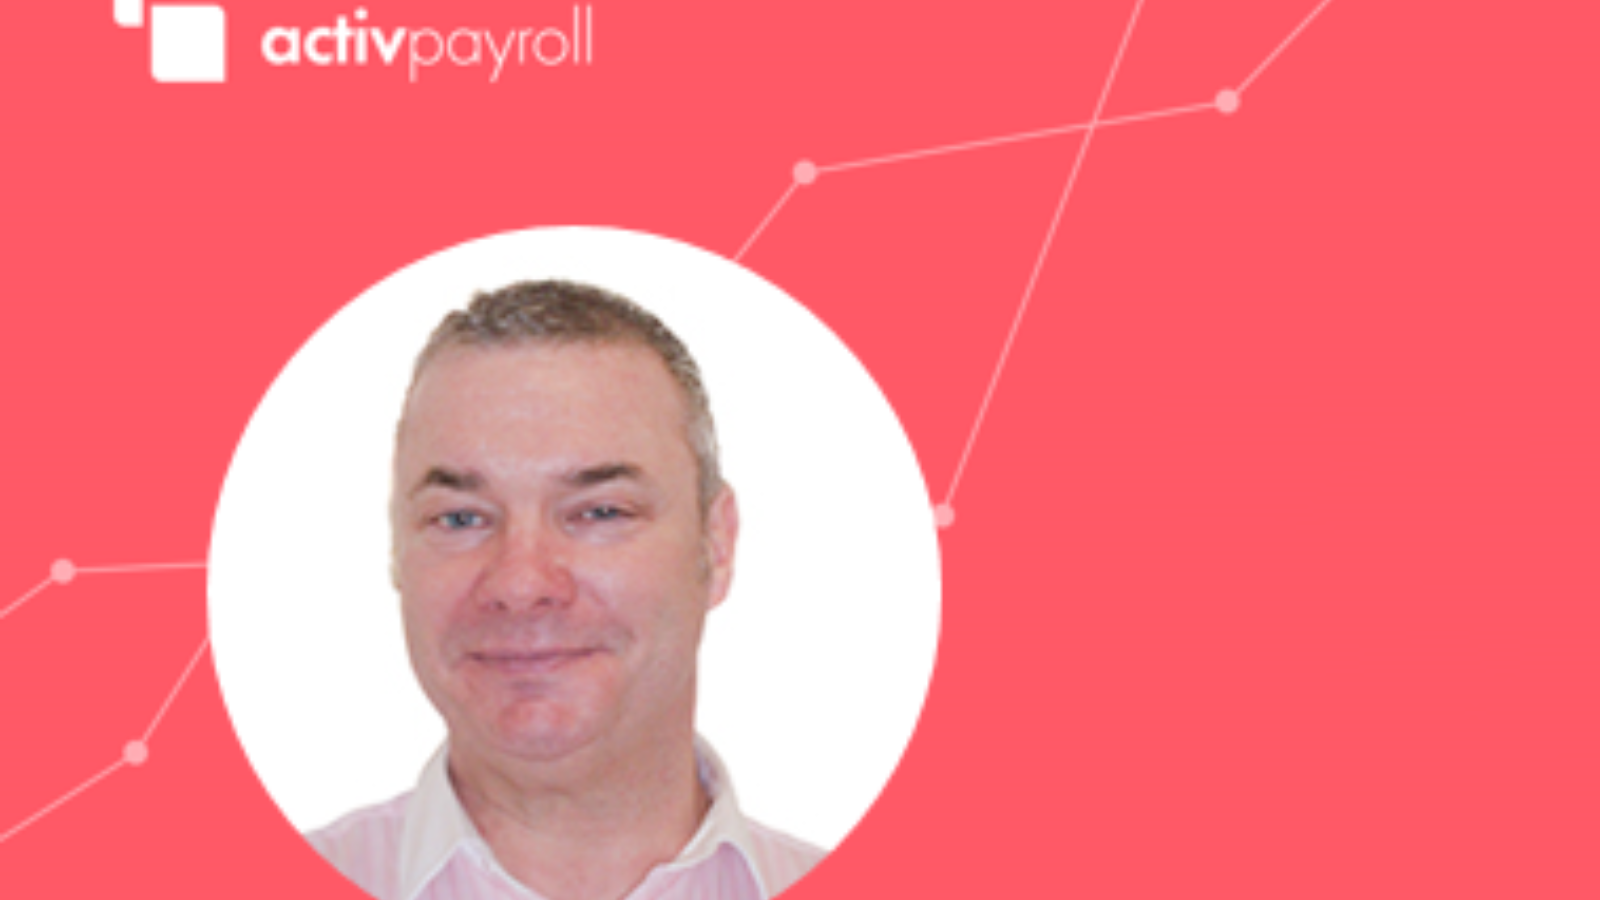 activpayroll appointments Mark Kimberling as chief commercial officer